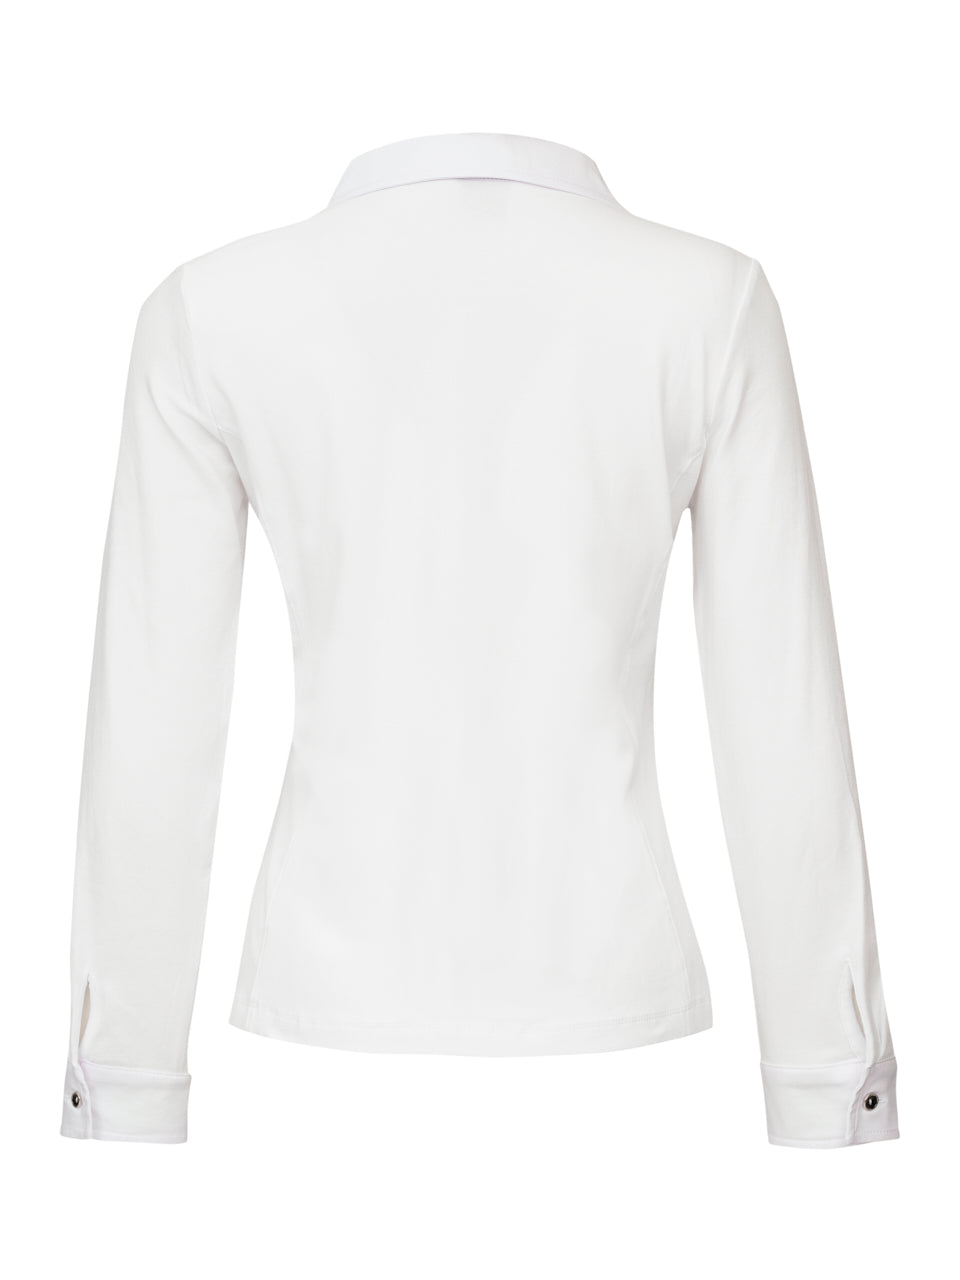 DOLCEZZA SPRING '23 women's casual white cotton printed long sleeve blouse - back